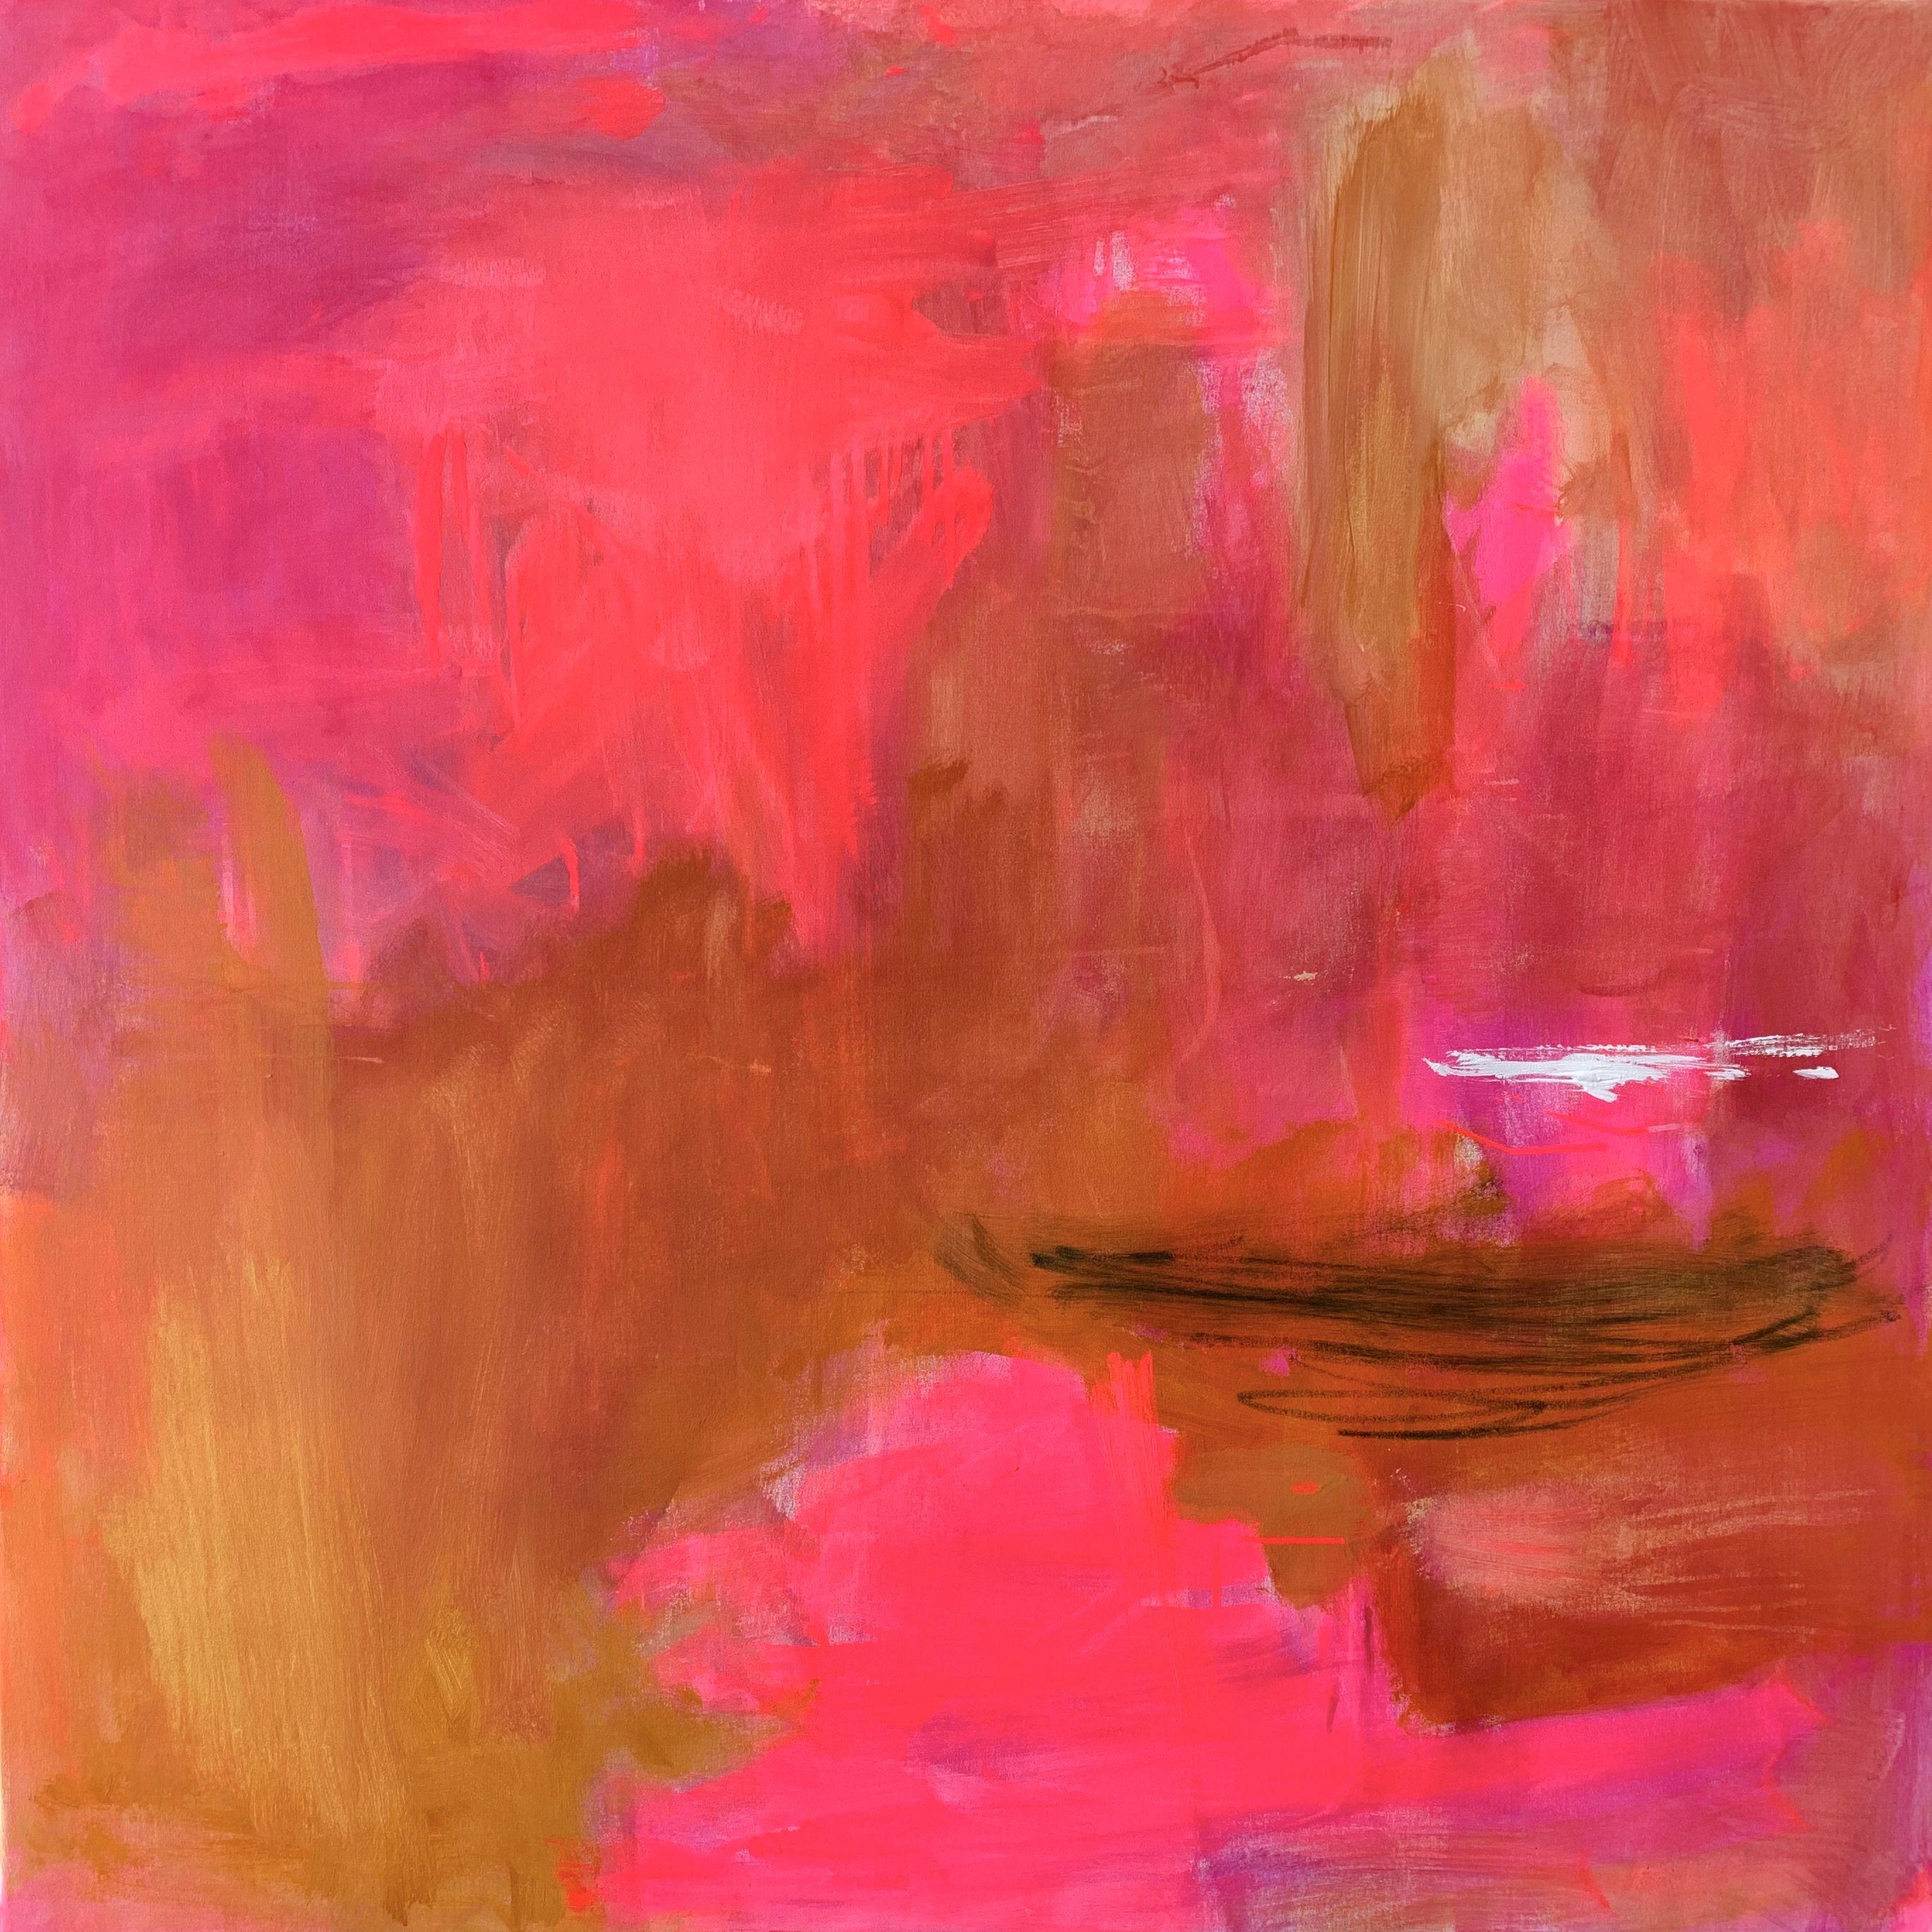 "Sonoran Sunset" is a stunning extra-large, abstract expressionist acrylic and oil painting on canvas by Nashville artist, Trixie Pitts. The palette is bright, bold and warm with hot pink, bright peach, magenta, and golden tan with a dash of black